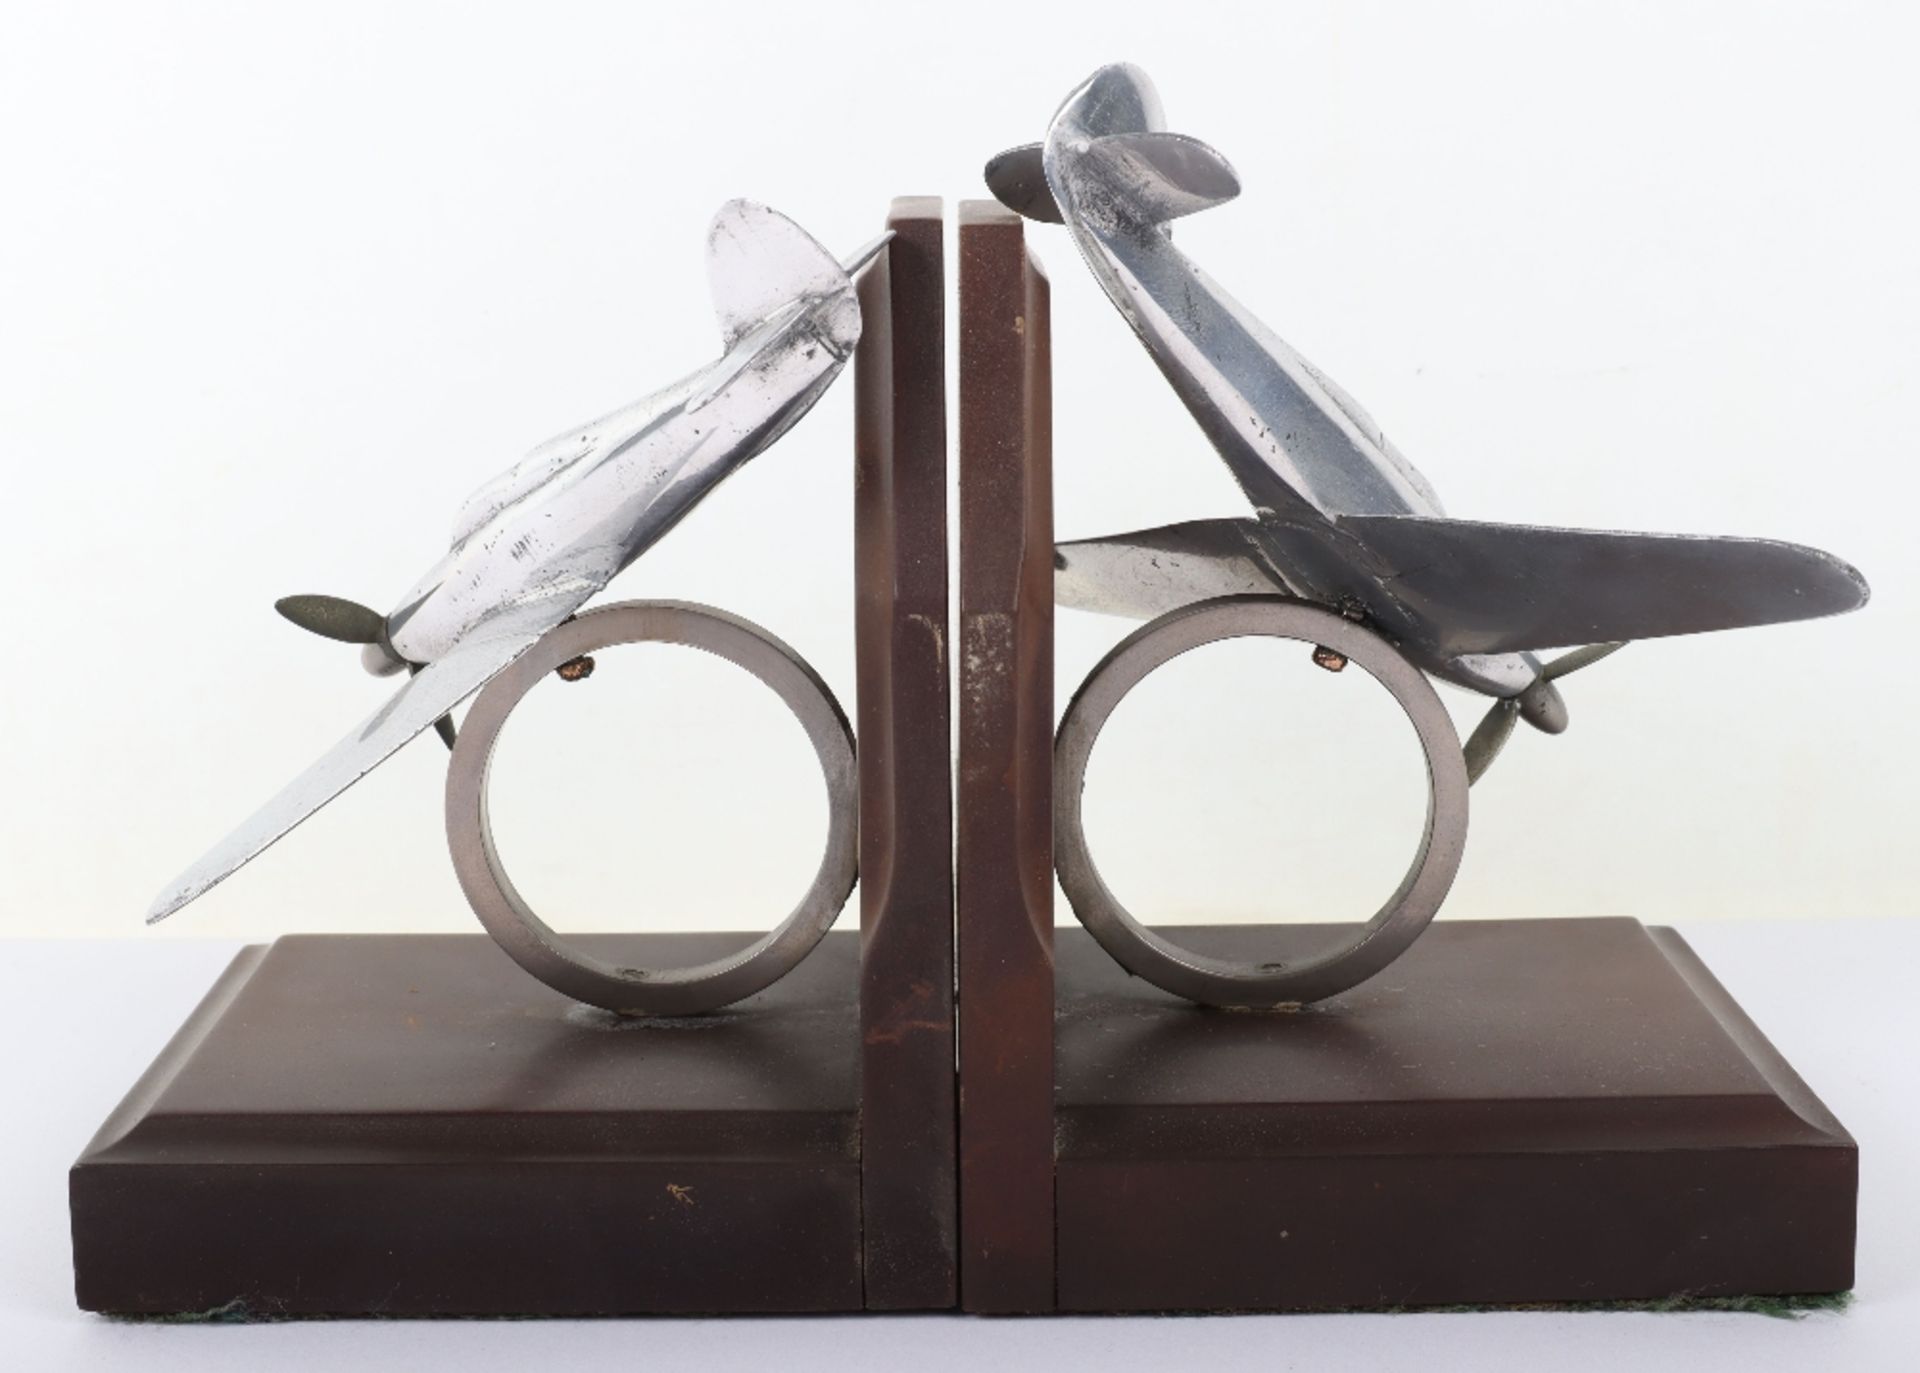 Pair of Bookends with Models of RAF Spitfire Aircraft - Image 2 of 4